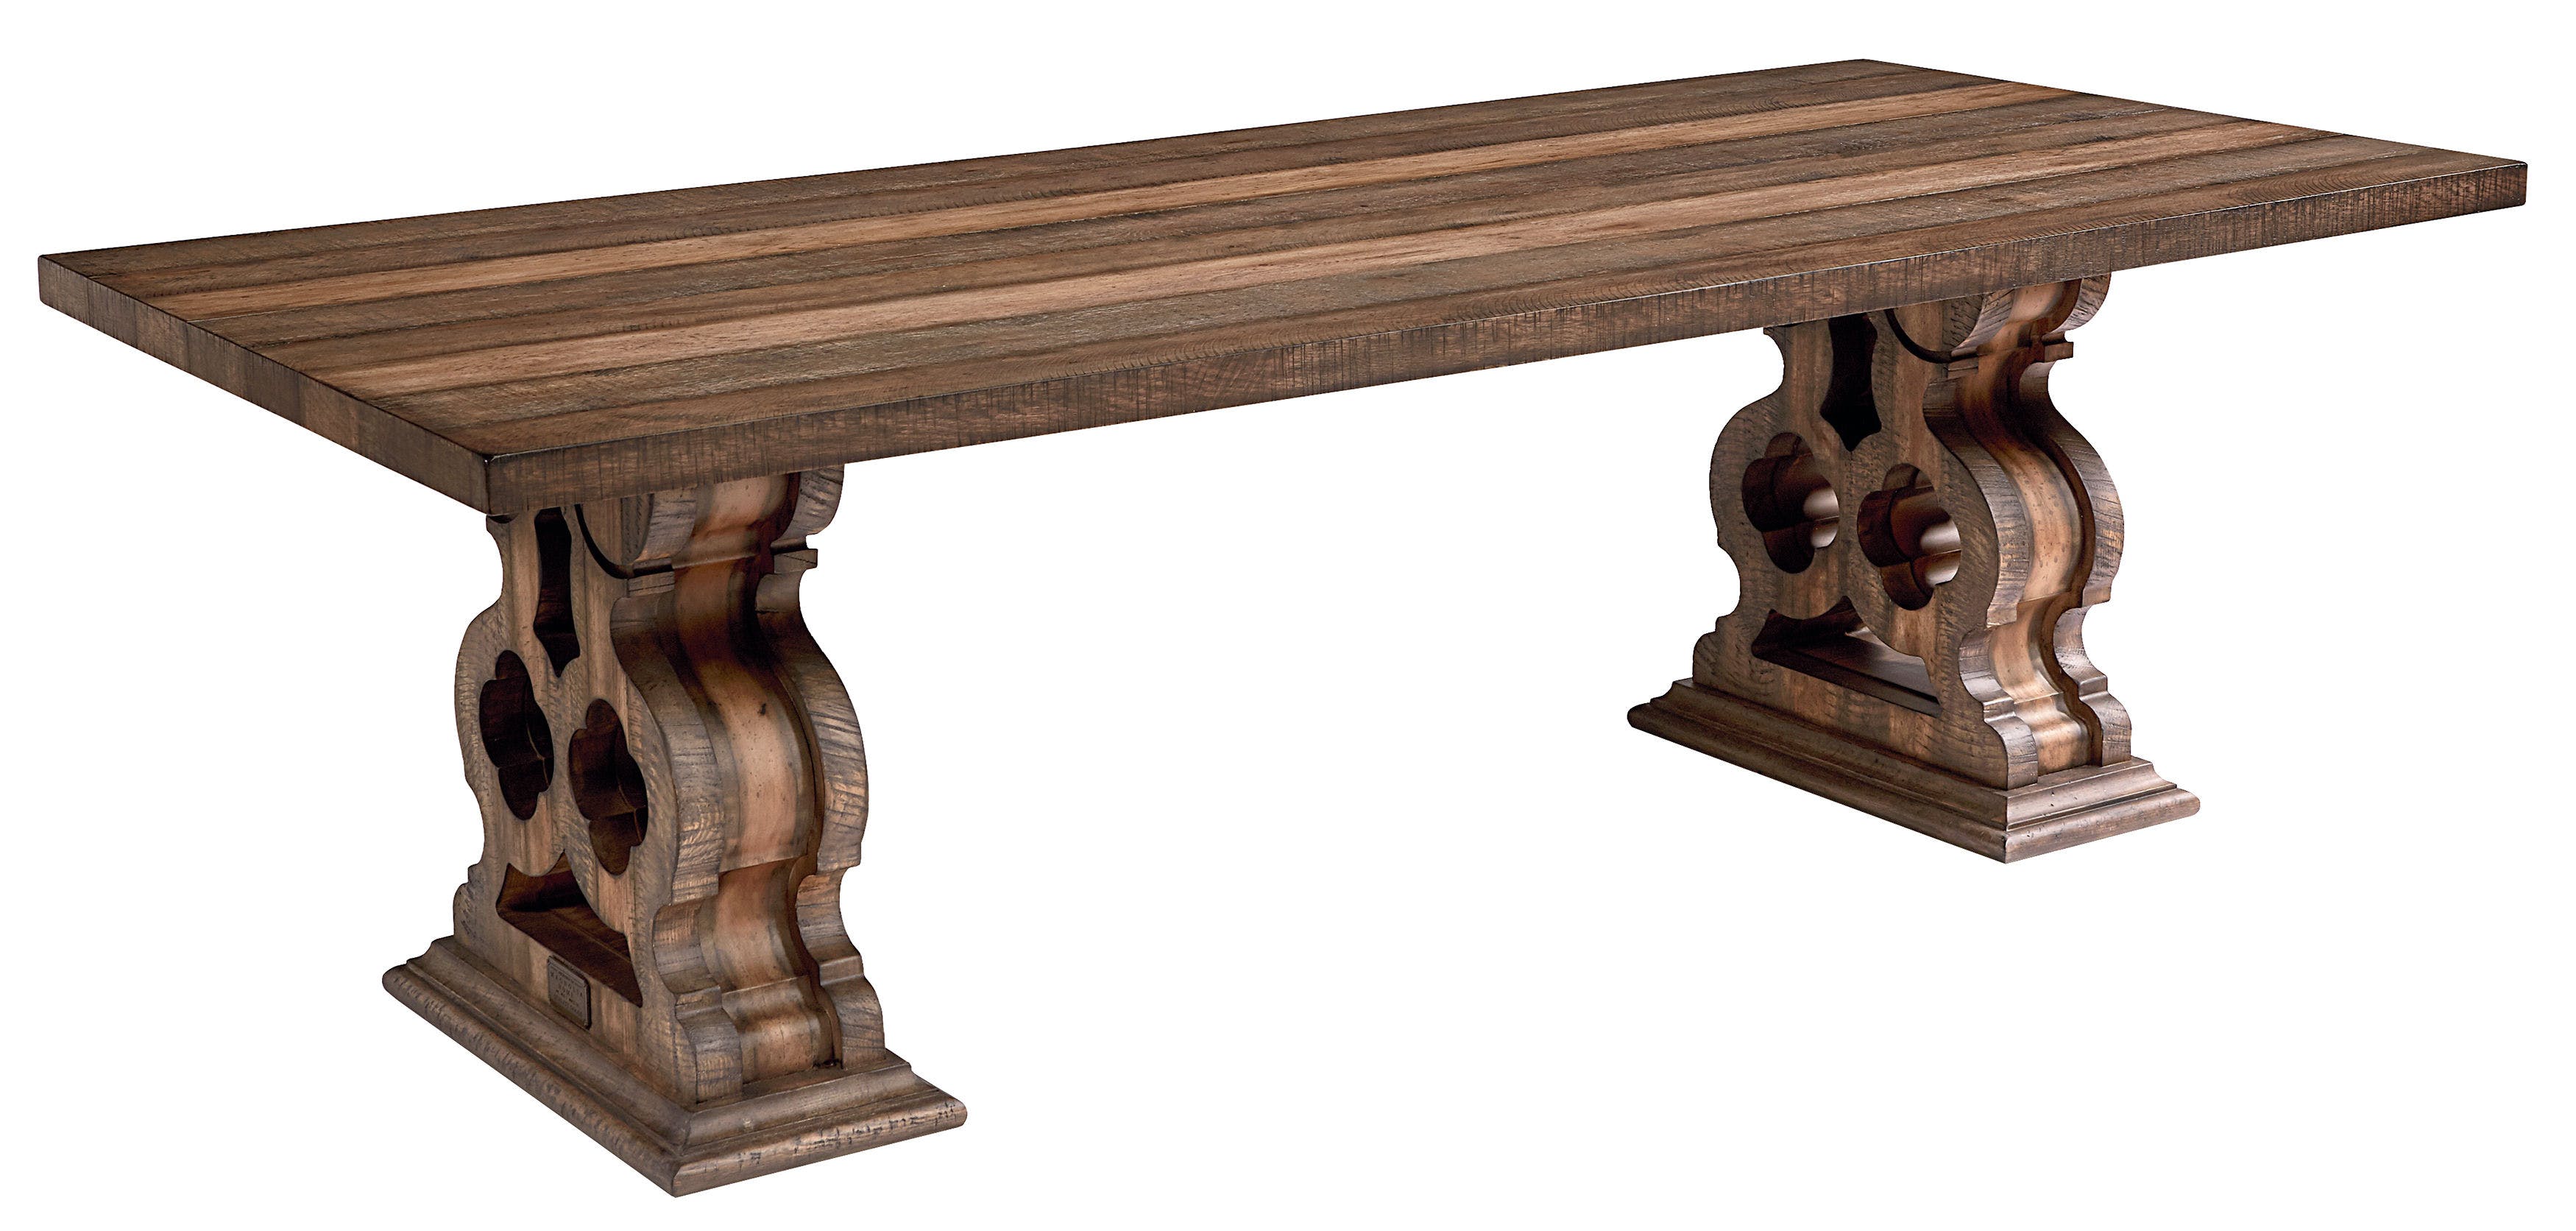 76 Inch Pedestal Dining Room Table